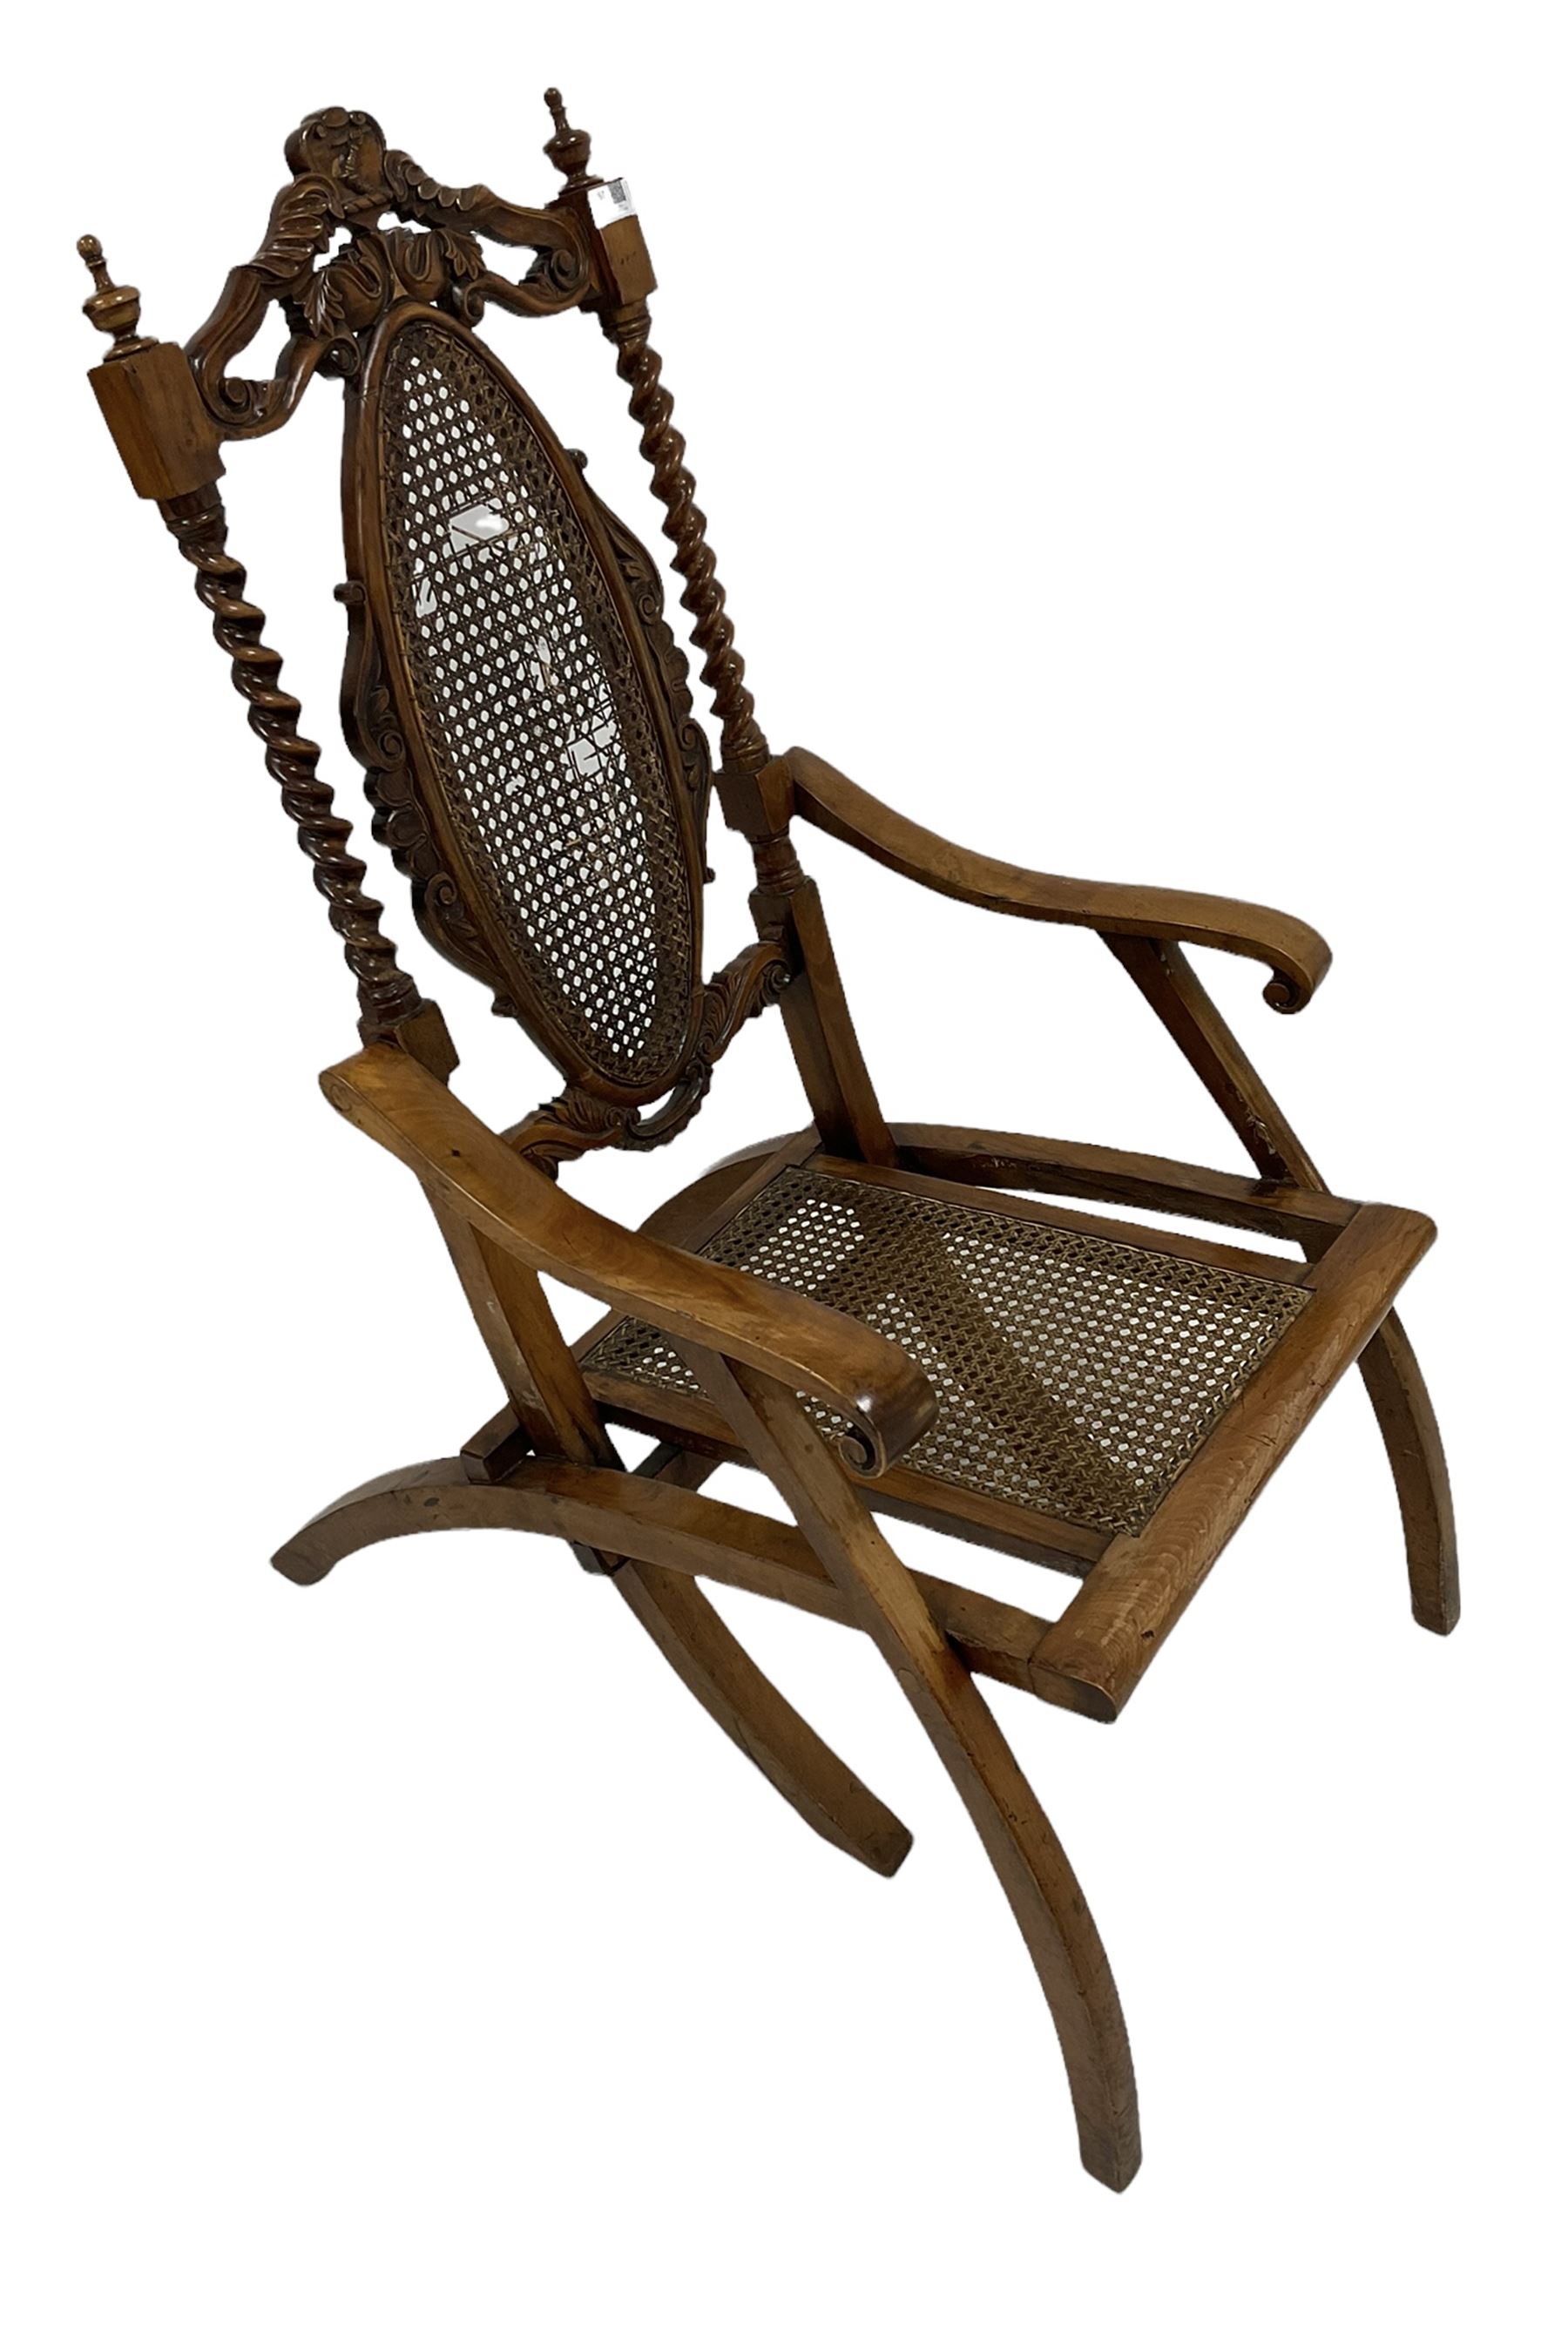 19th century walnut folding campaign chair - Image 2 of 5